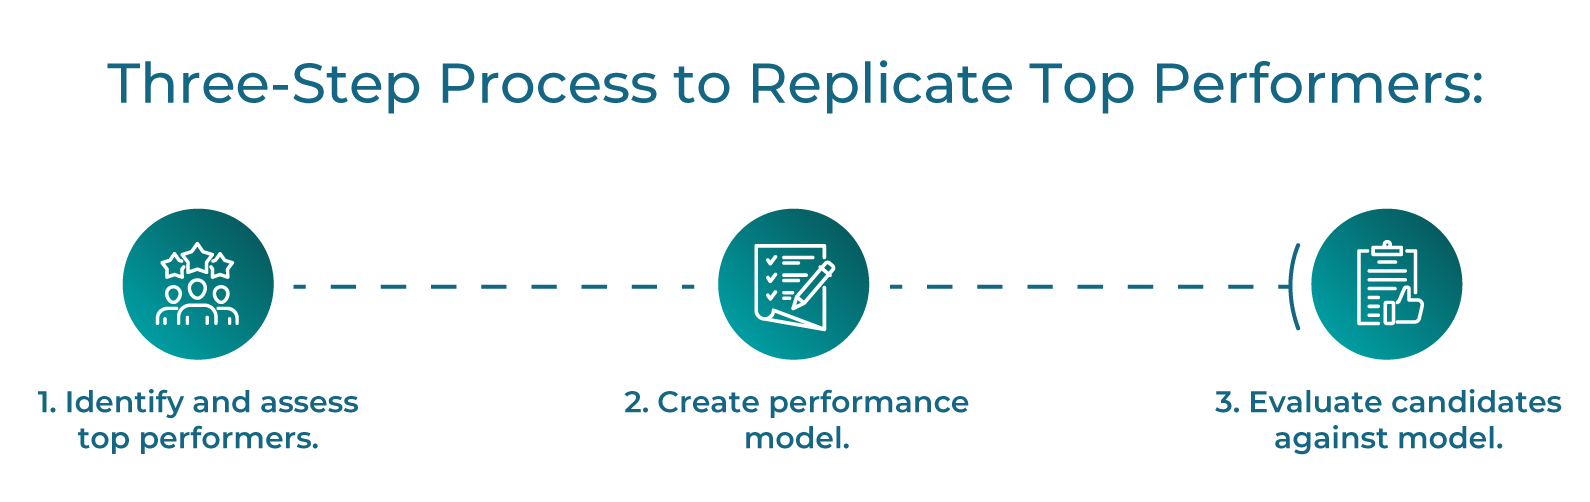 Three-Step Process to Replicate Top Performers: 
1. Identify and assess your top performers. 
Decide who is outperforming peers, whether in terms of sales performance, output, or other important indicators. Outline critical behaviors and traits that showcase success in their role.
 	2. Create a job performance model. 
Build a performance model that’s an objective picture of what it takes to succeed in this role, mapping different factors that impact on-the-job performance. 
3. Evaluate future candidates against the performance model.